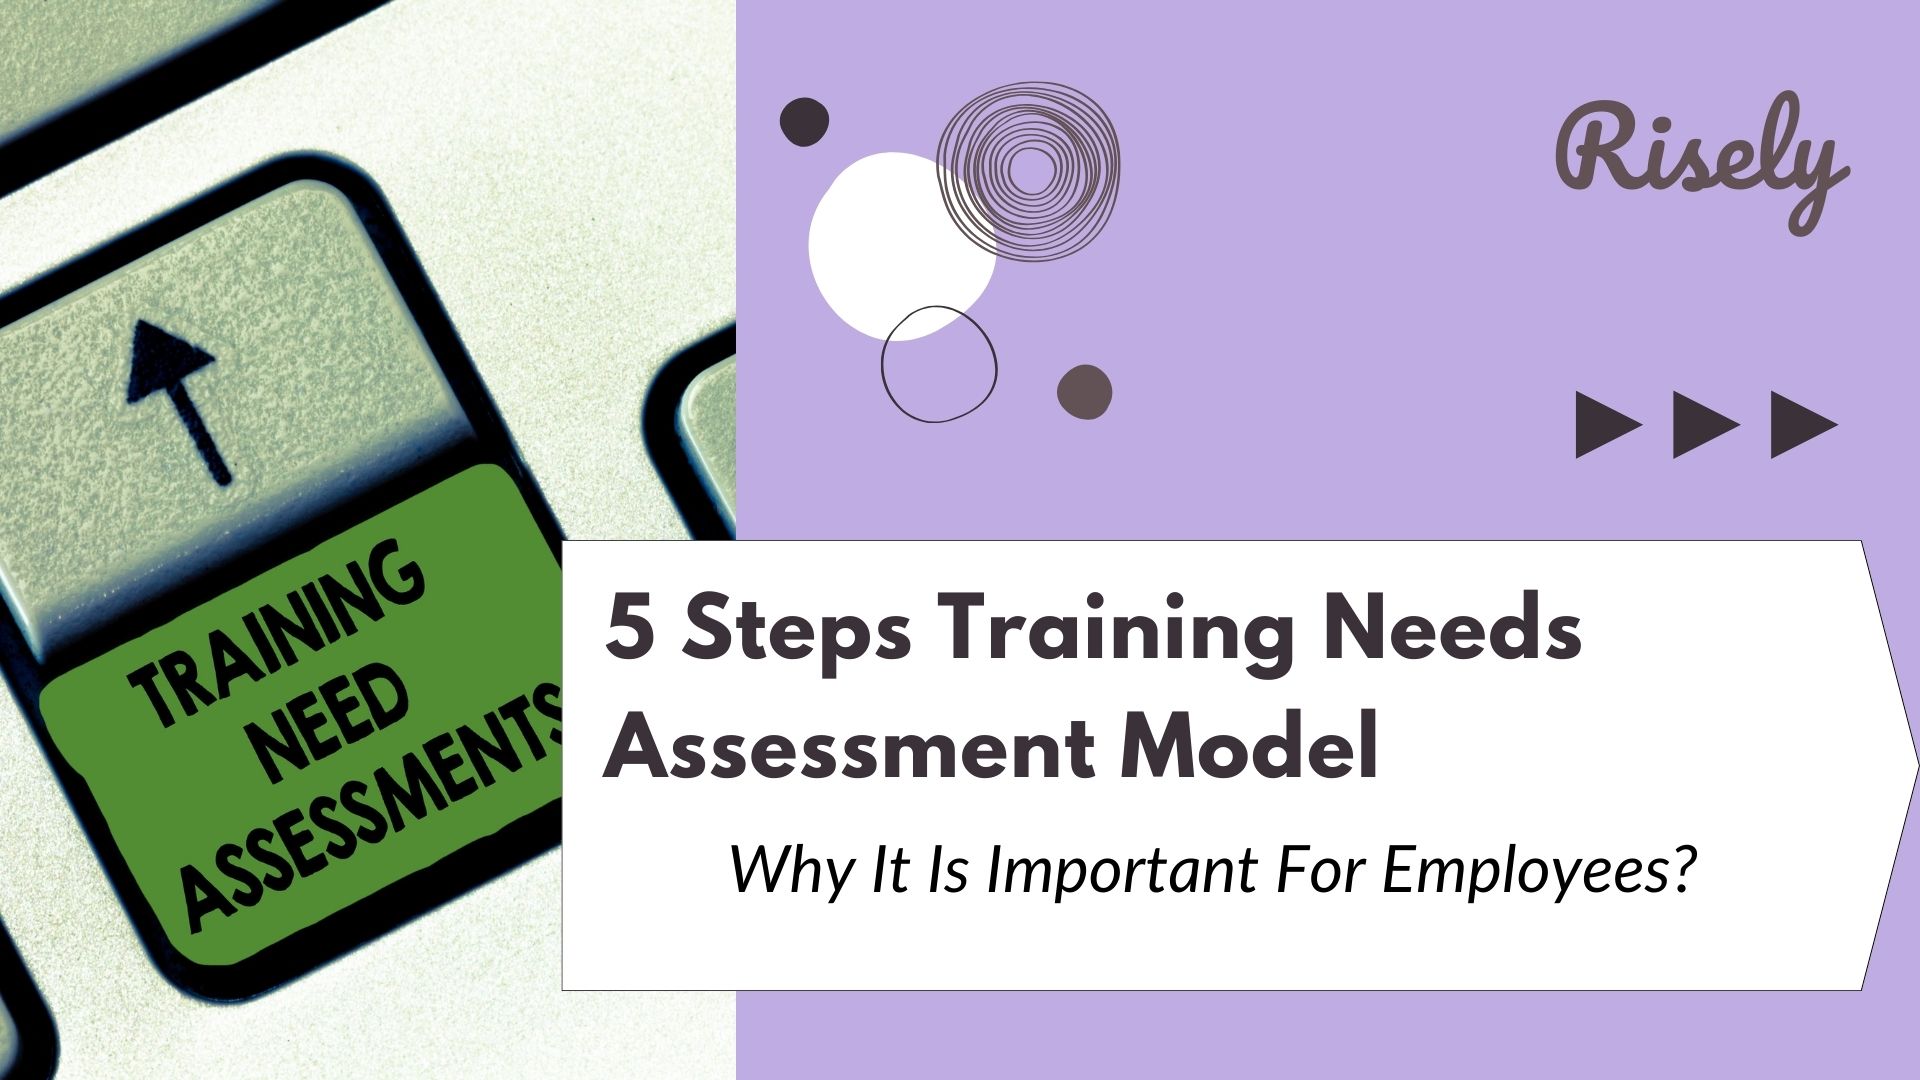 5 Steps Training Needs Assessment Model: Why It Is Important For Employees?